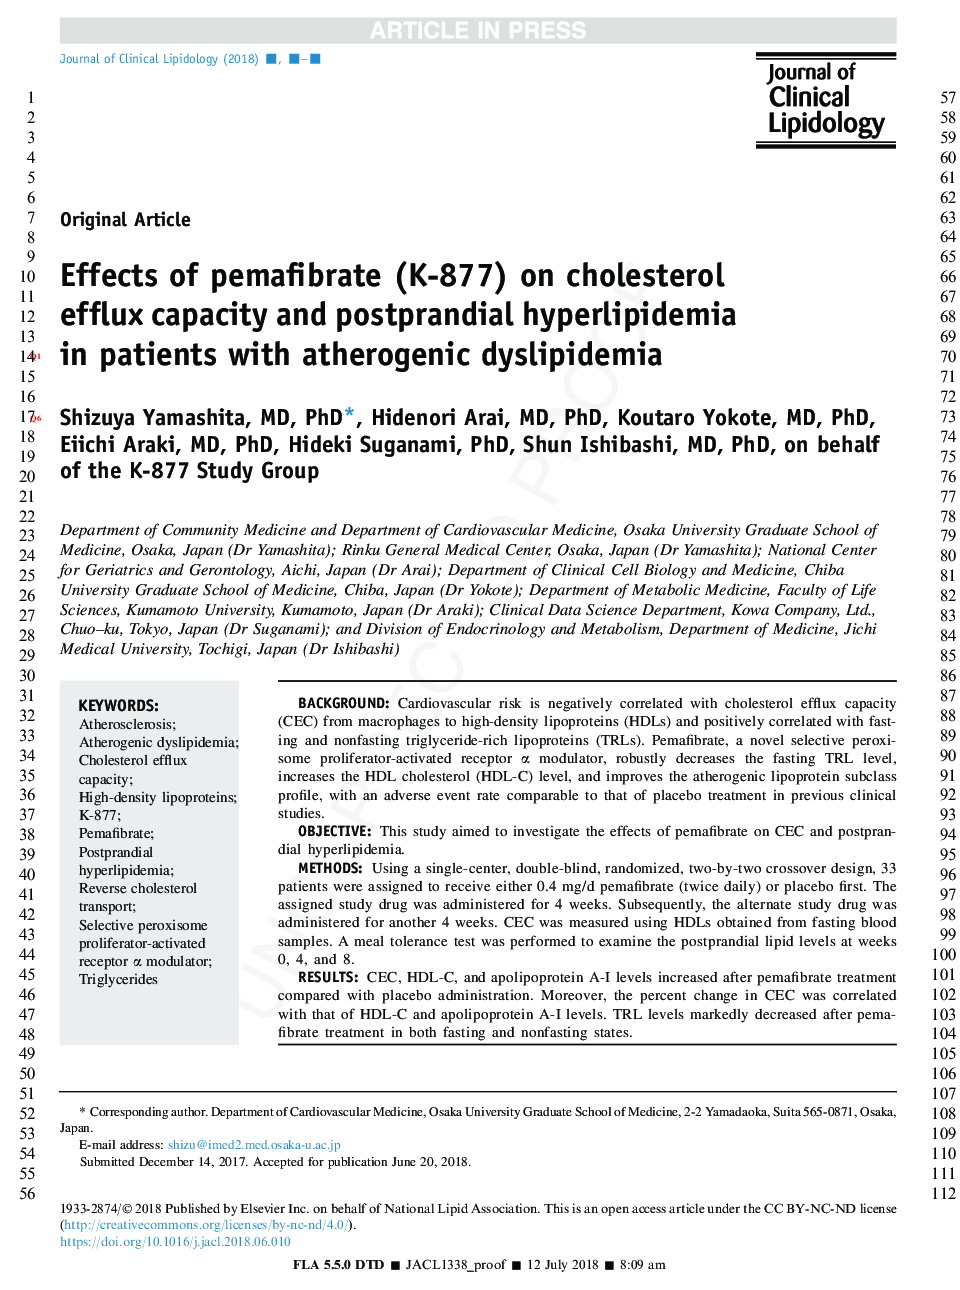 Effects of pemafibrate (K-877) on cholesterol efflux capacity and postprandial hyperlipidemia in patients with atherogenic dyslipidemia